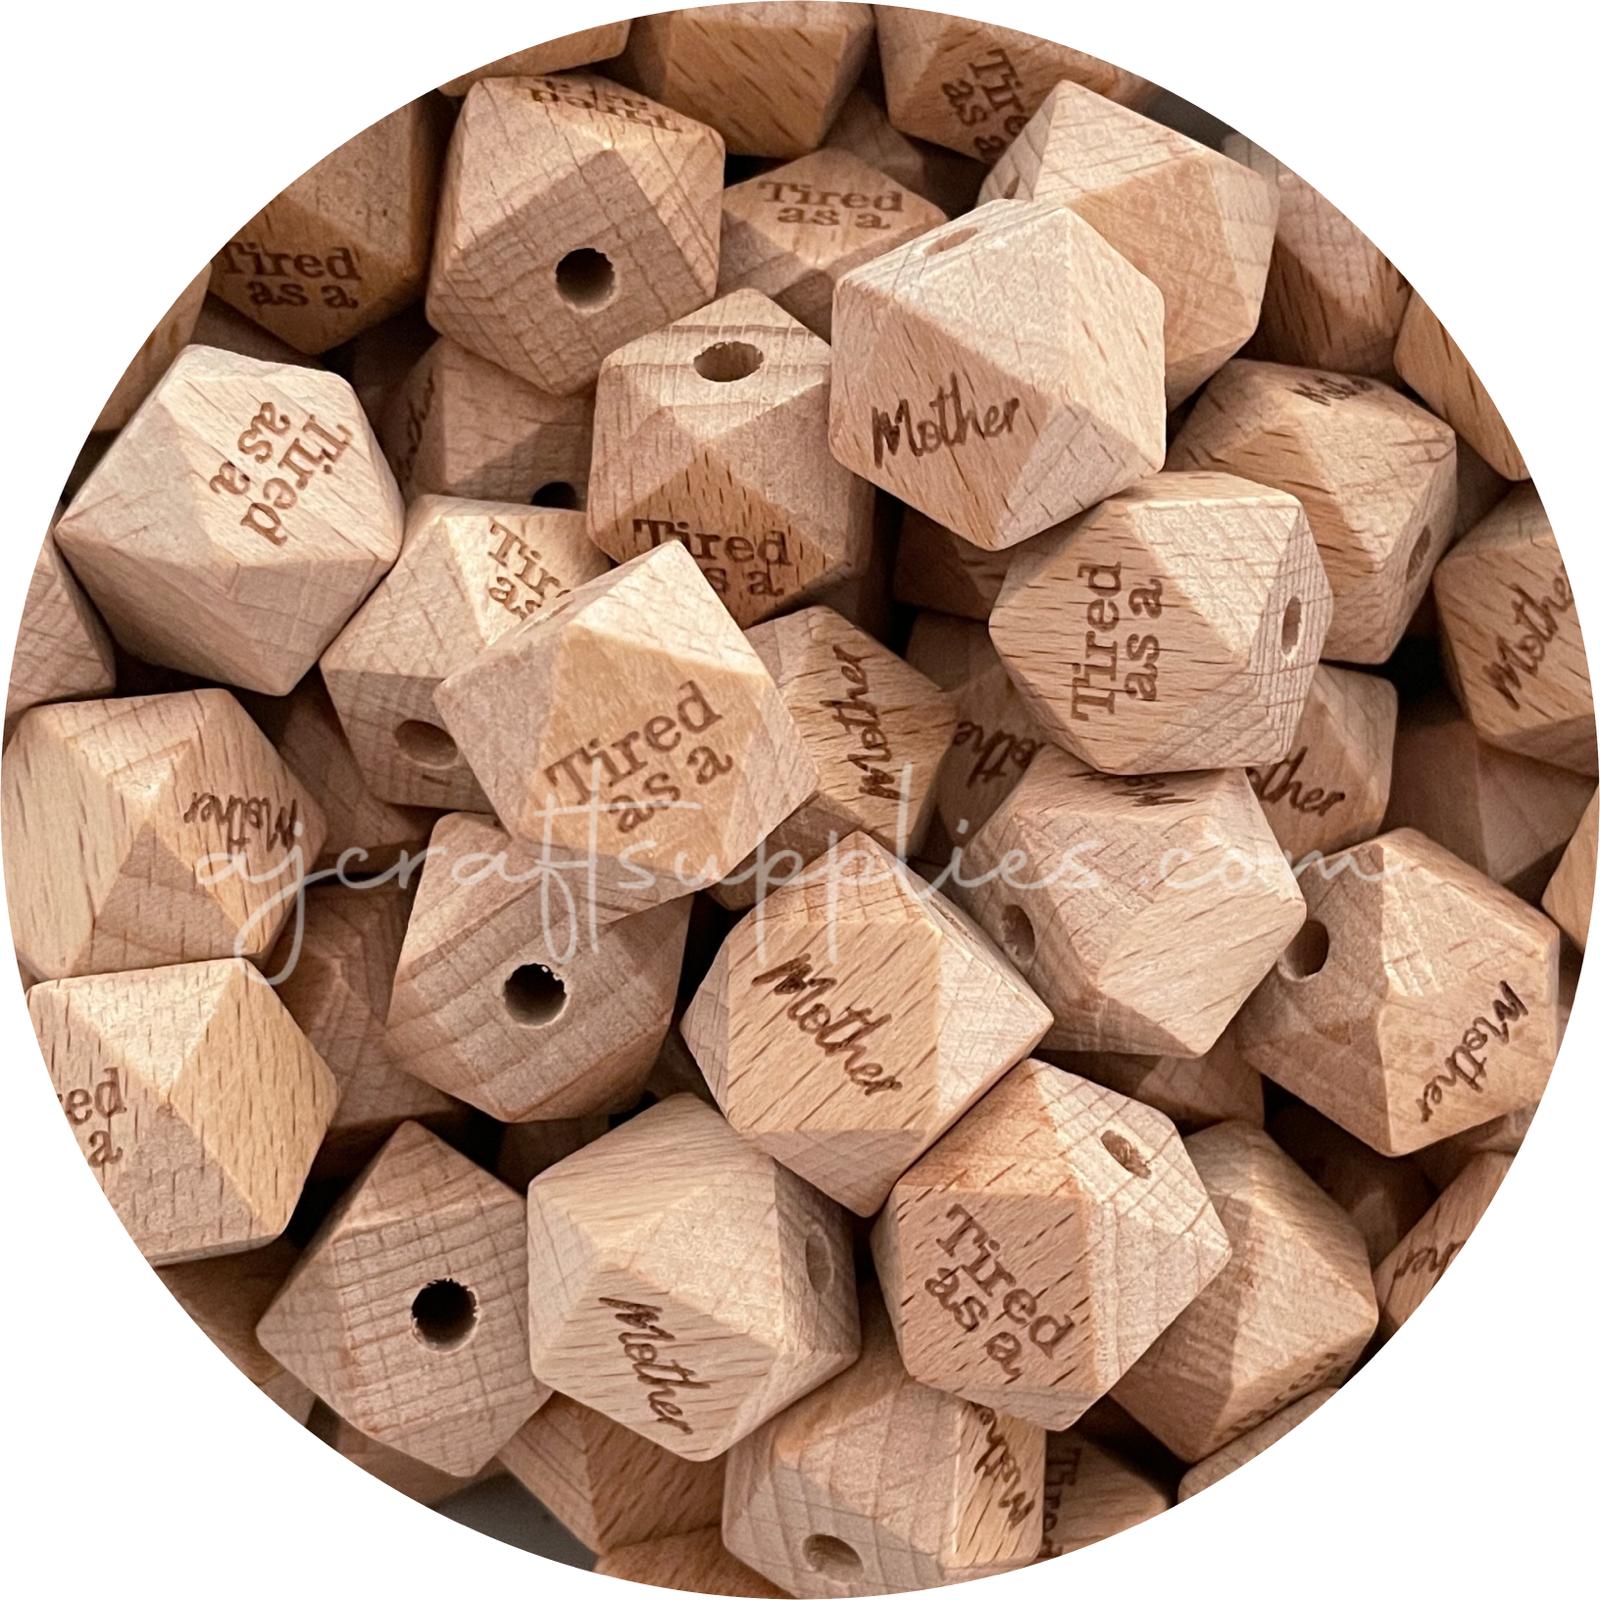 Beech Wood Engraved Beads (Tired as a Mother) - 18mm Hexagon - 5 beads *CLEARANCE*